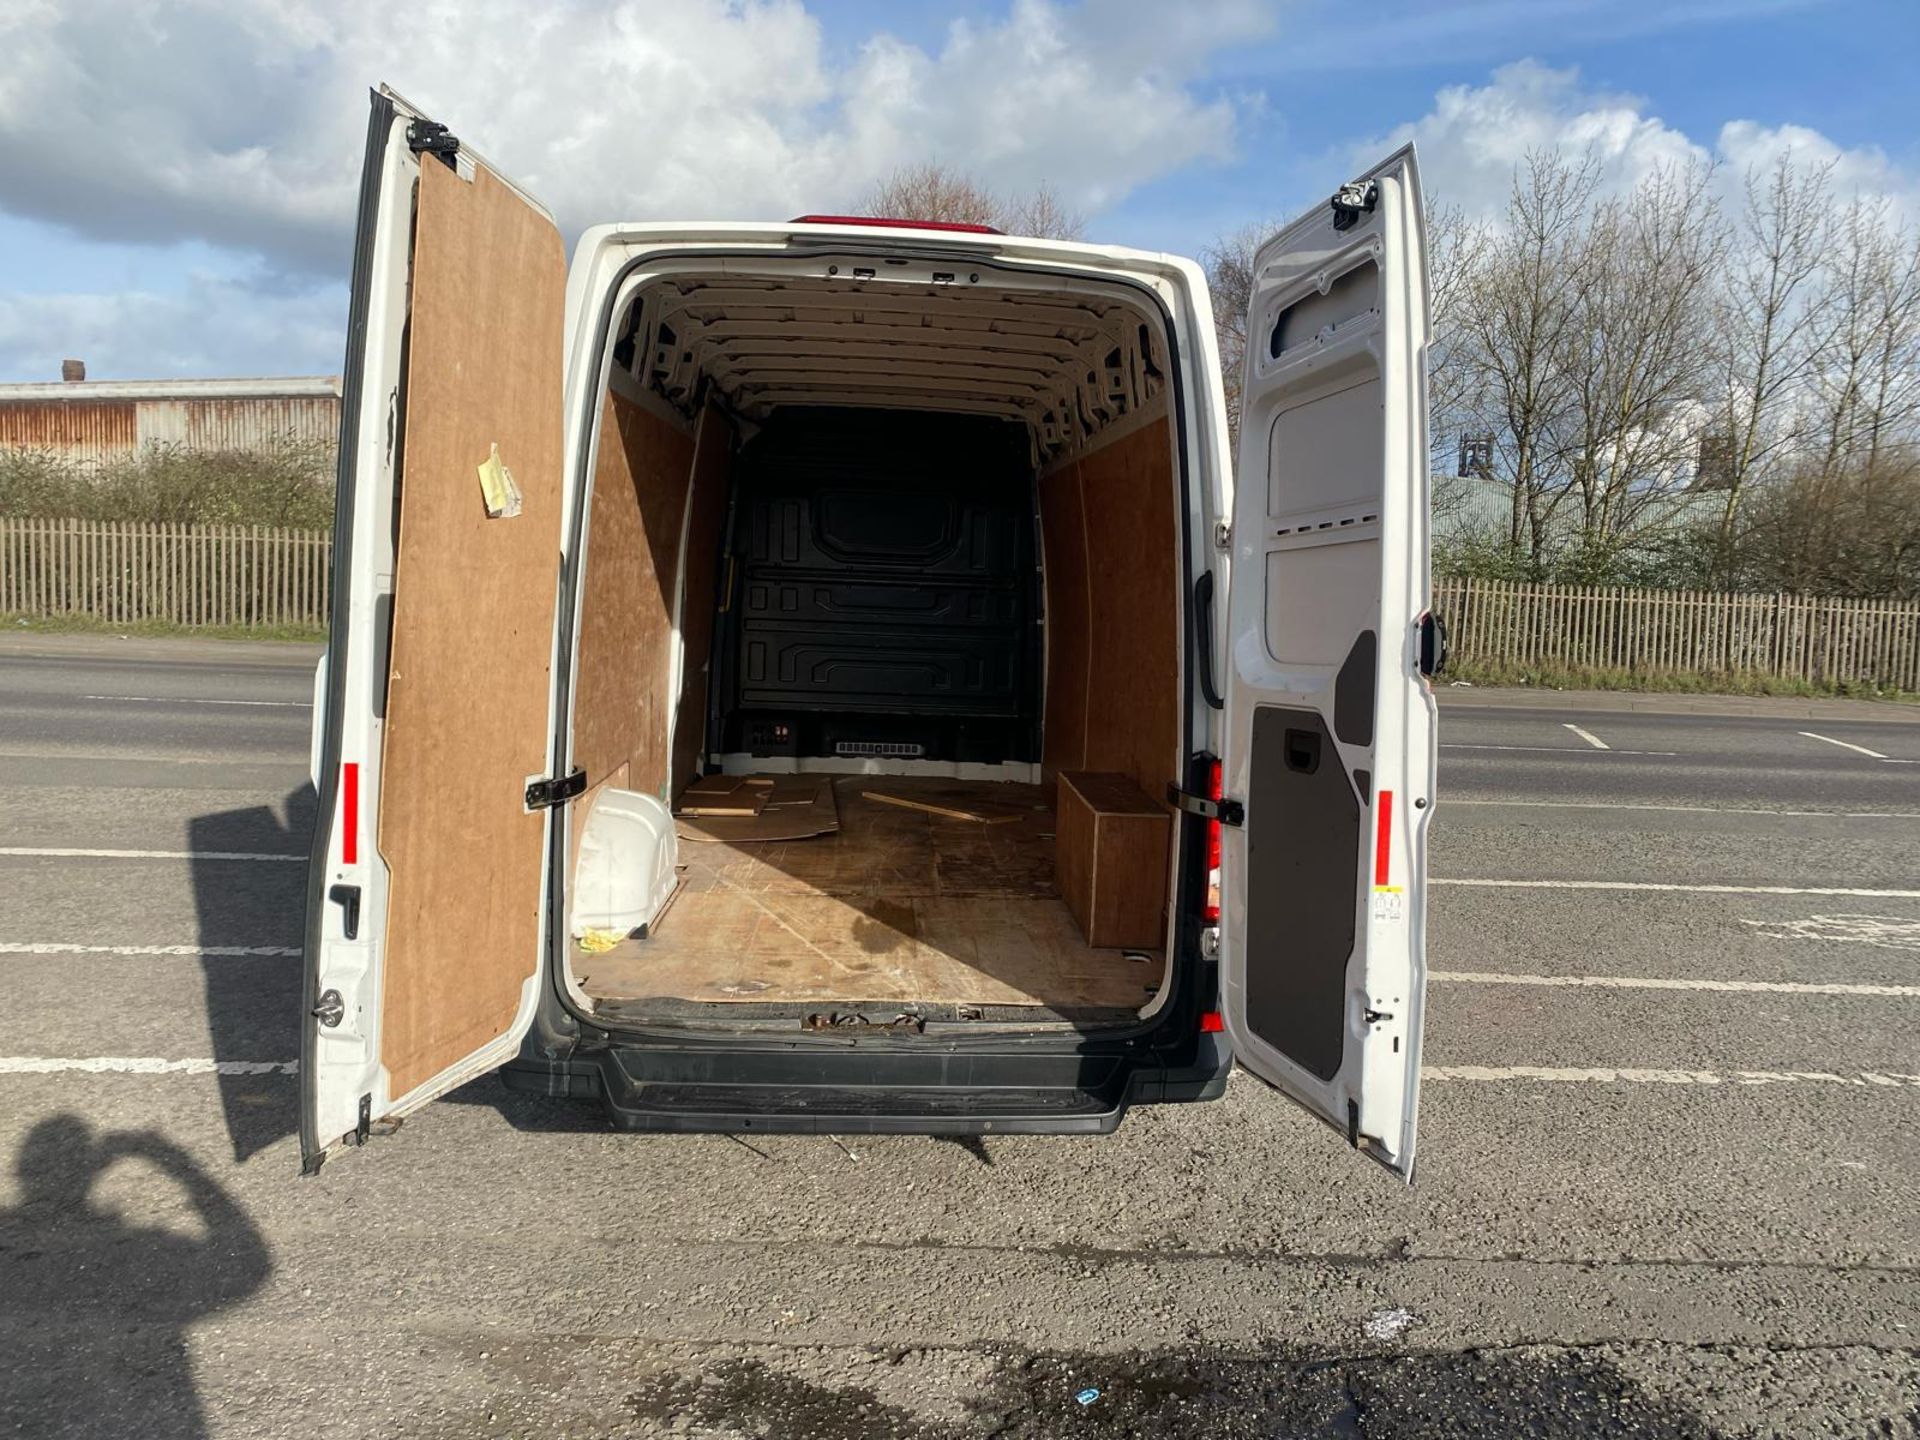 2019 69 VOLKSWAGEN CRAFTER LWB HIGH ROOF PANEL VAN - 87K MILES - PLY LINED. - Image 2 of 12